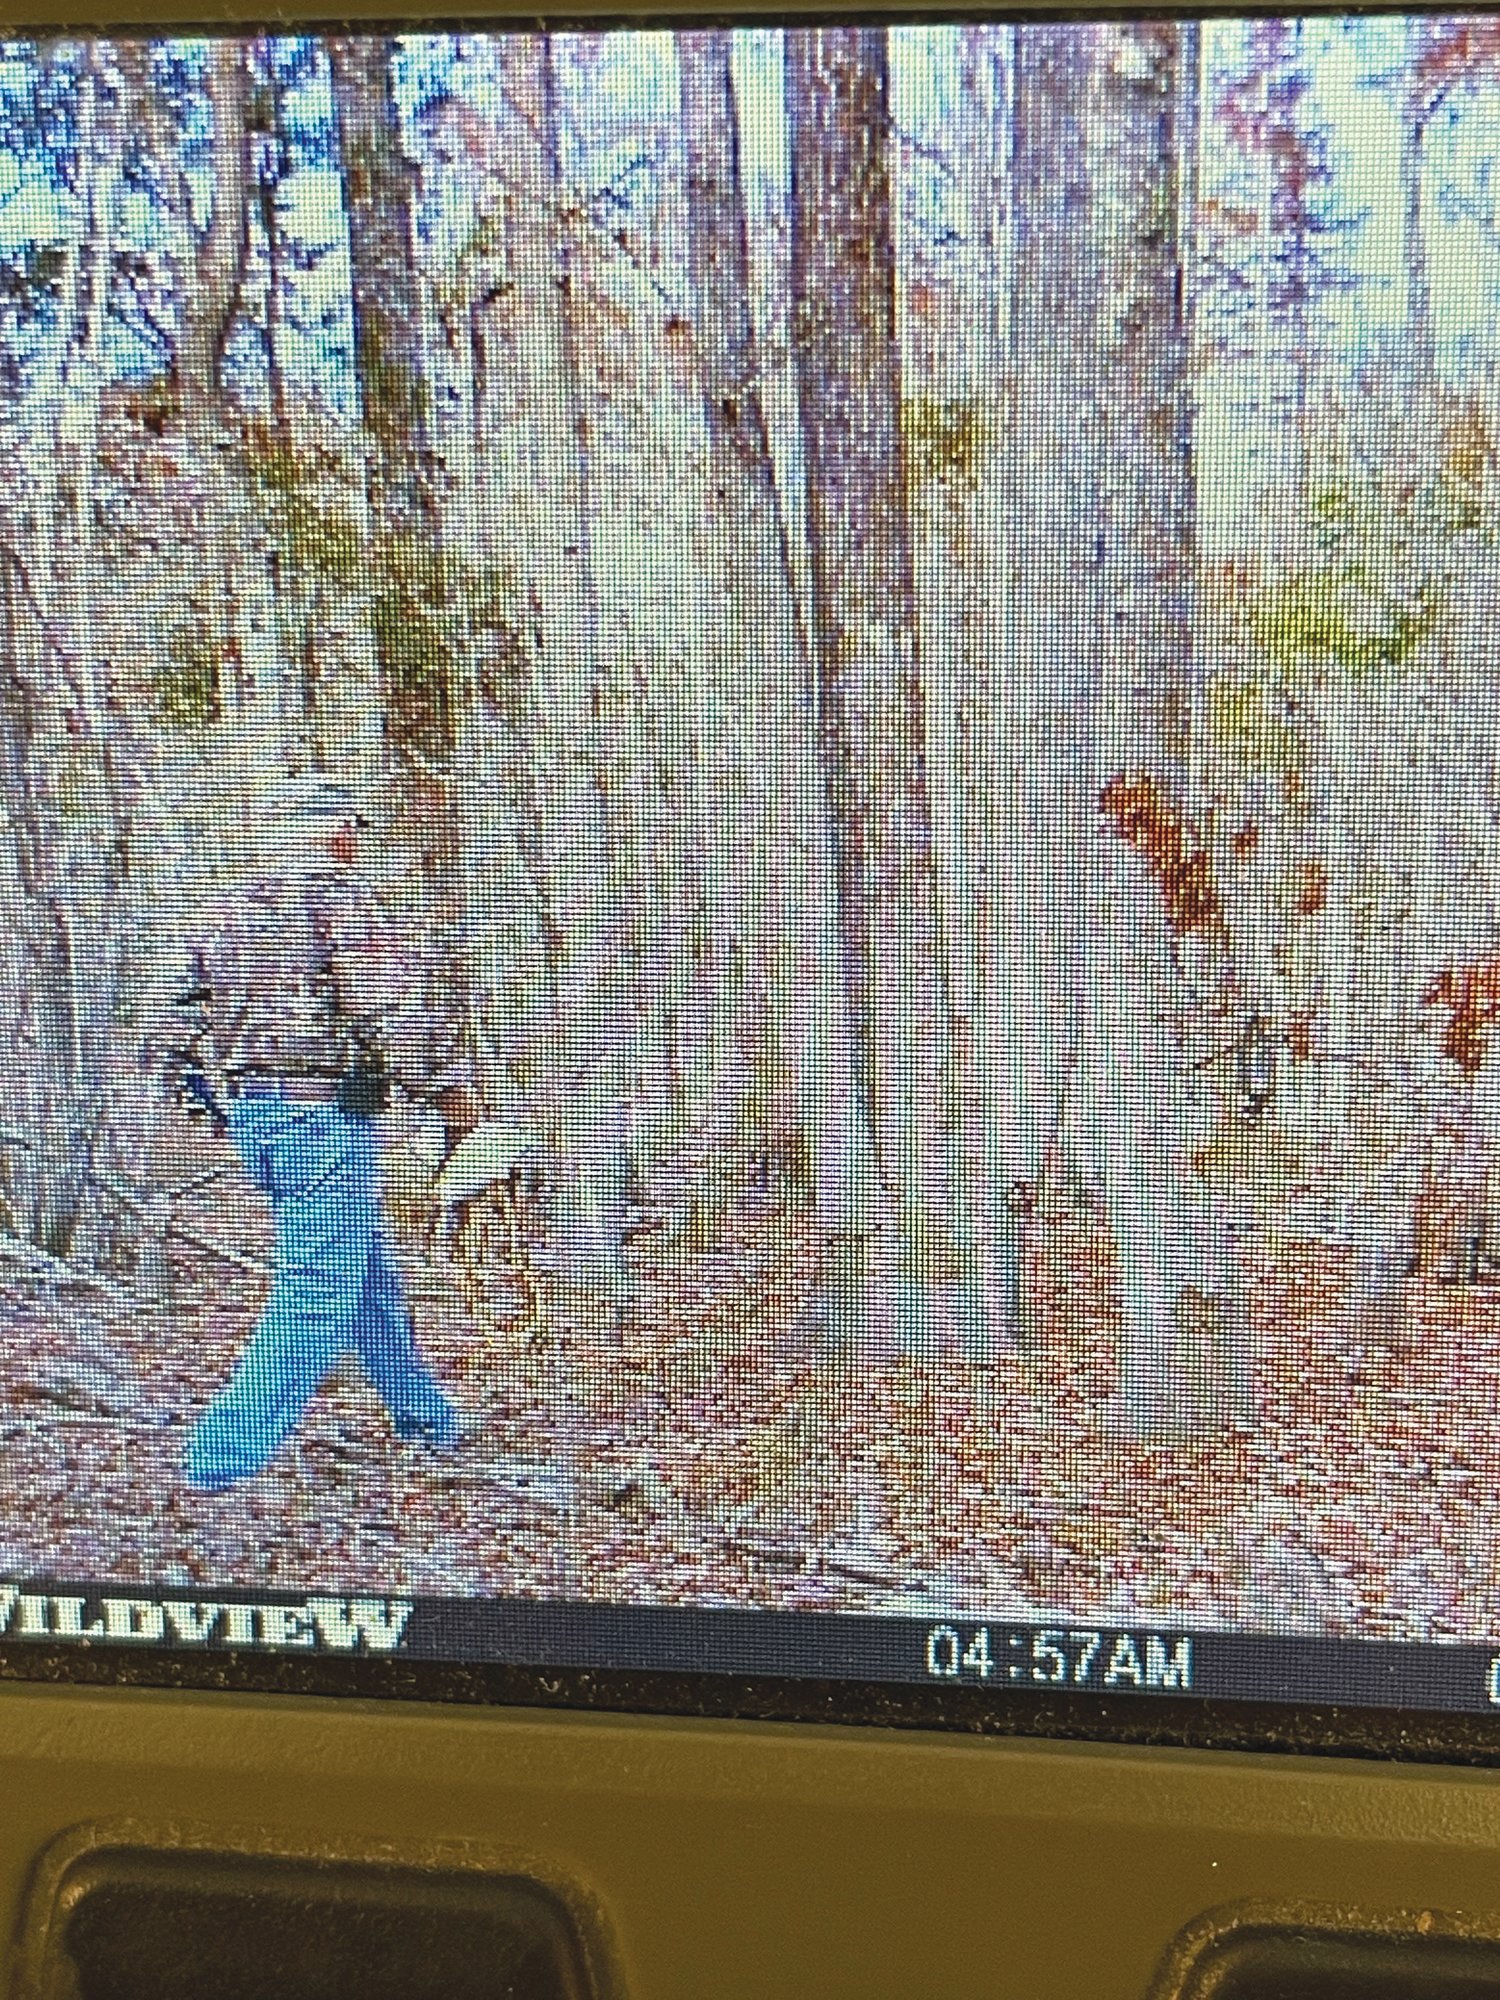 A trail camera caught a photo of me walking into the woods of the reserve.